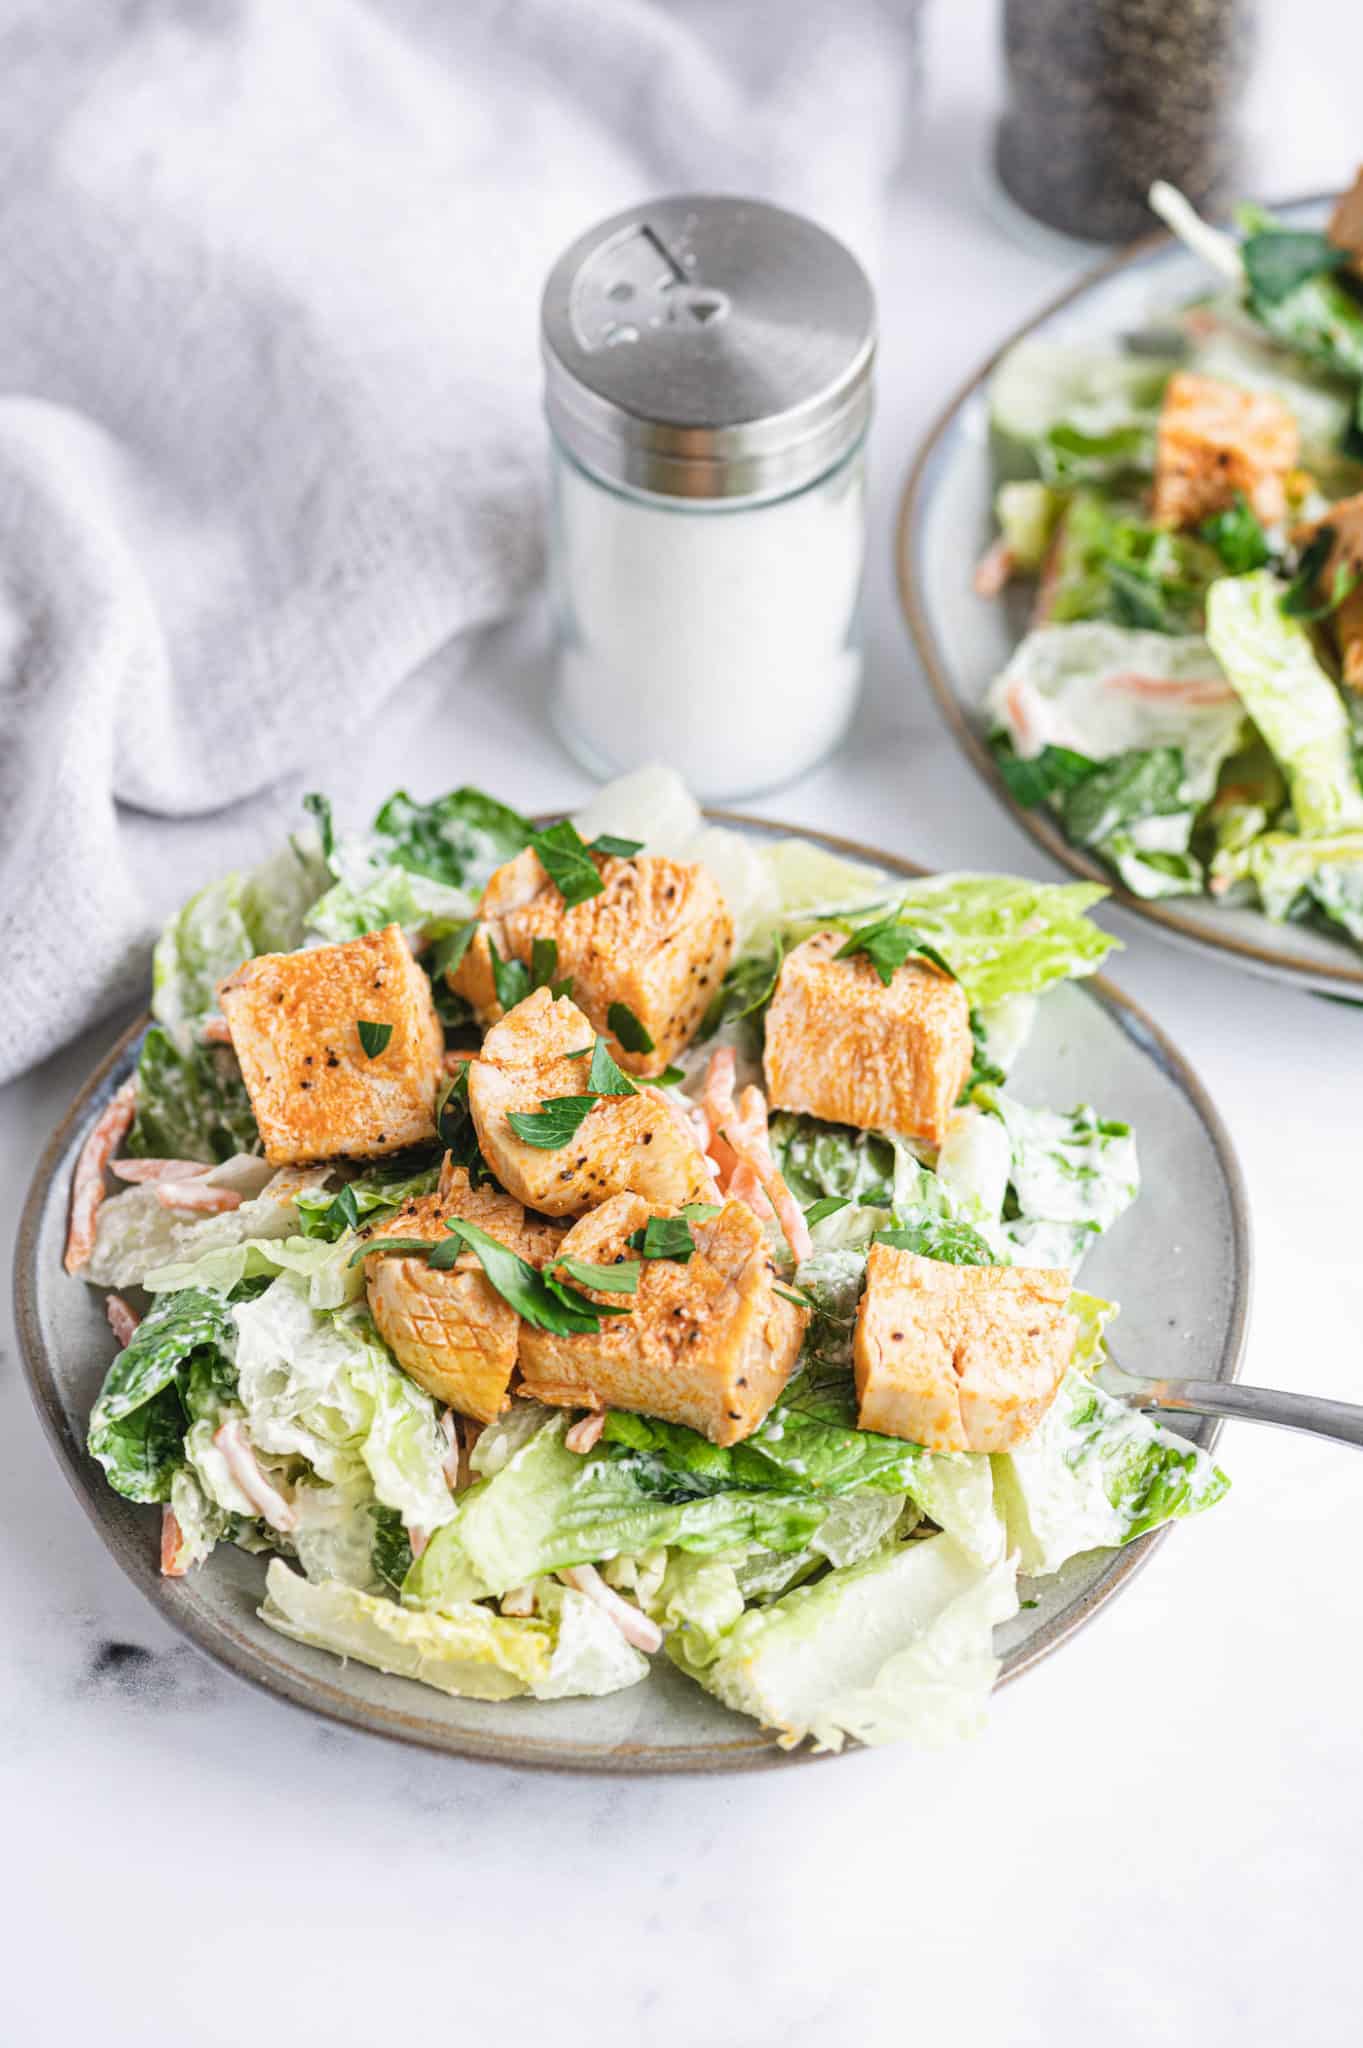 A plate of romaine salad with buffalo chicken